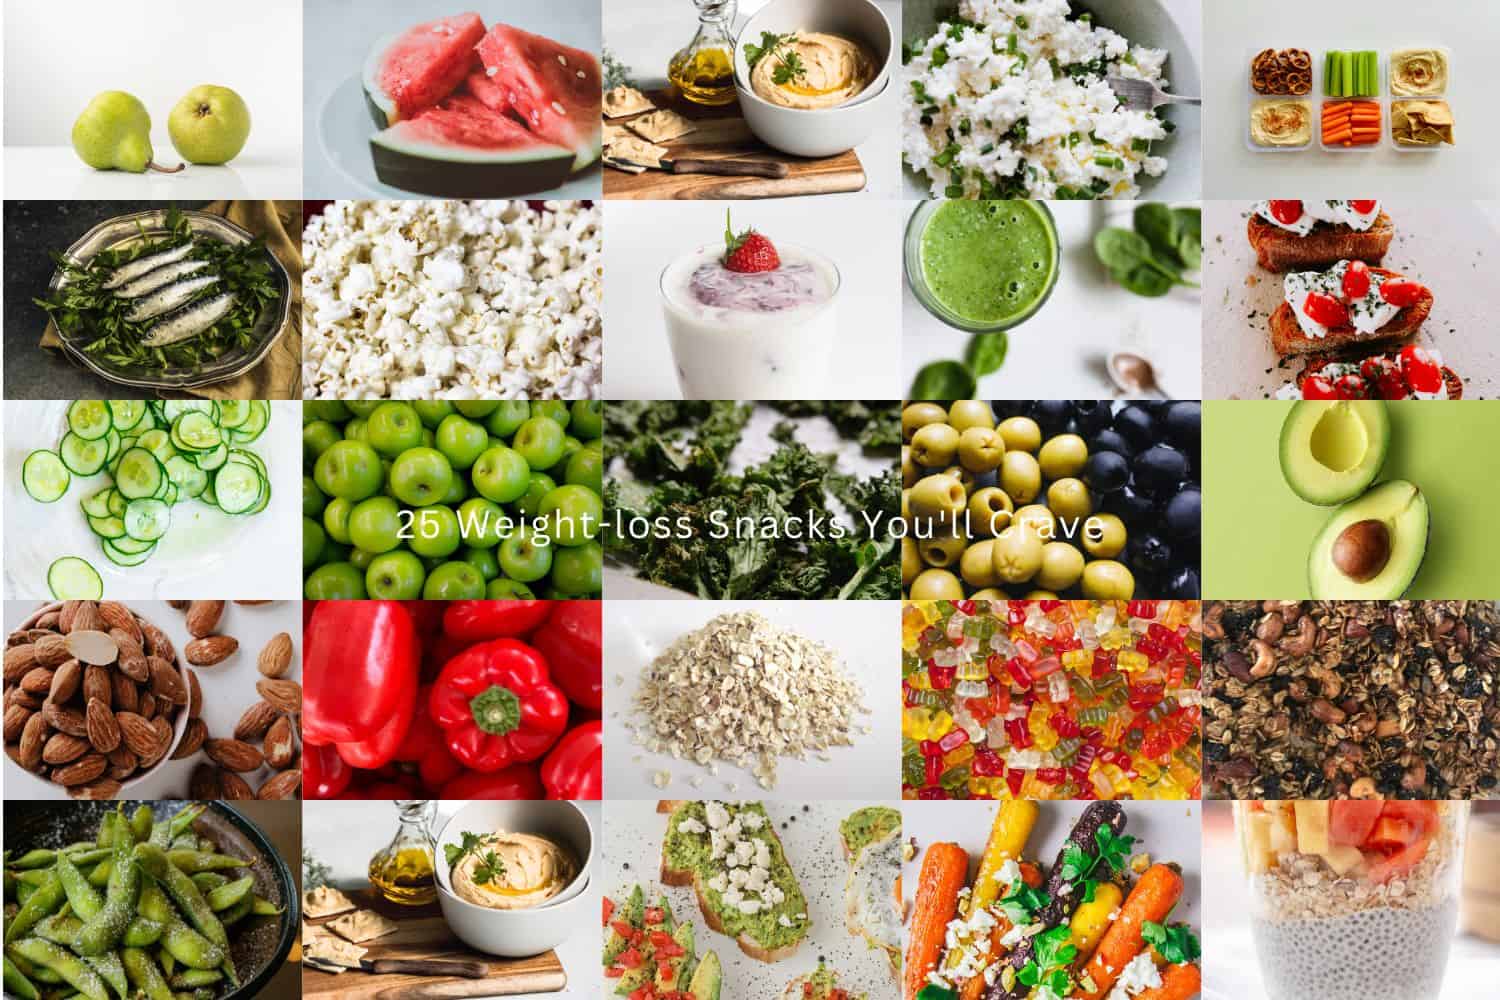 25 mini photos stacked in a tight grid displaying a version of each food described in the article, with one small line of text displaying "25 weight-loss snacks you'll crave"